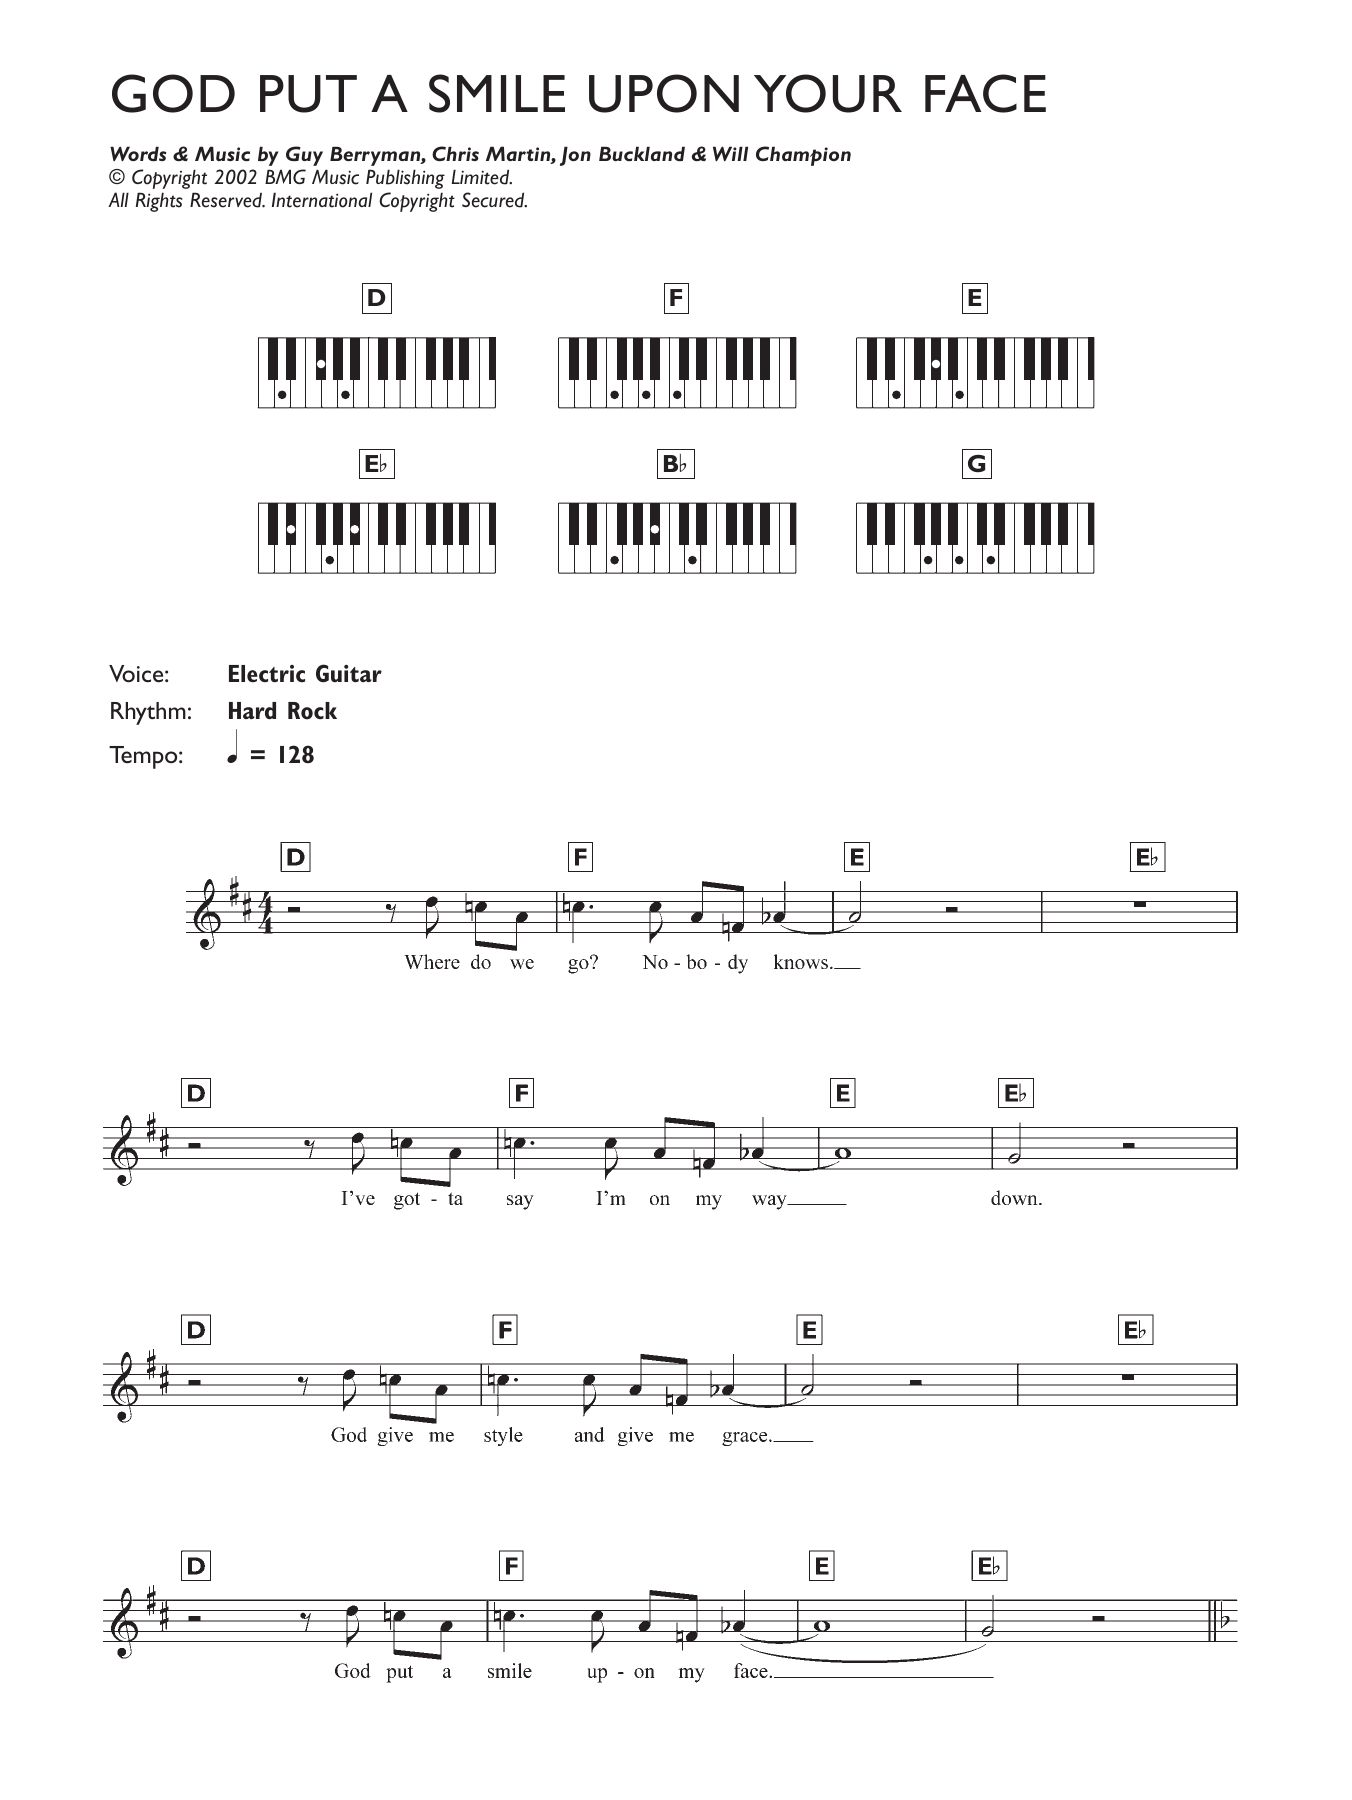 Download Coldplay God Put A Smile Upon Your Face Sheet Music